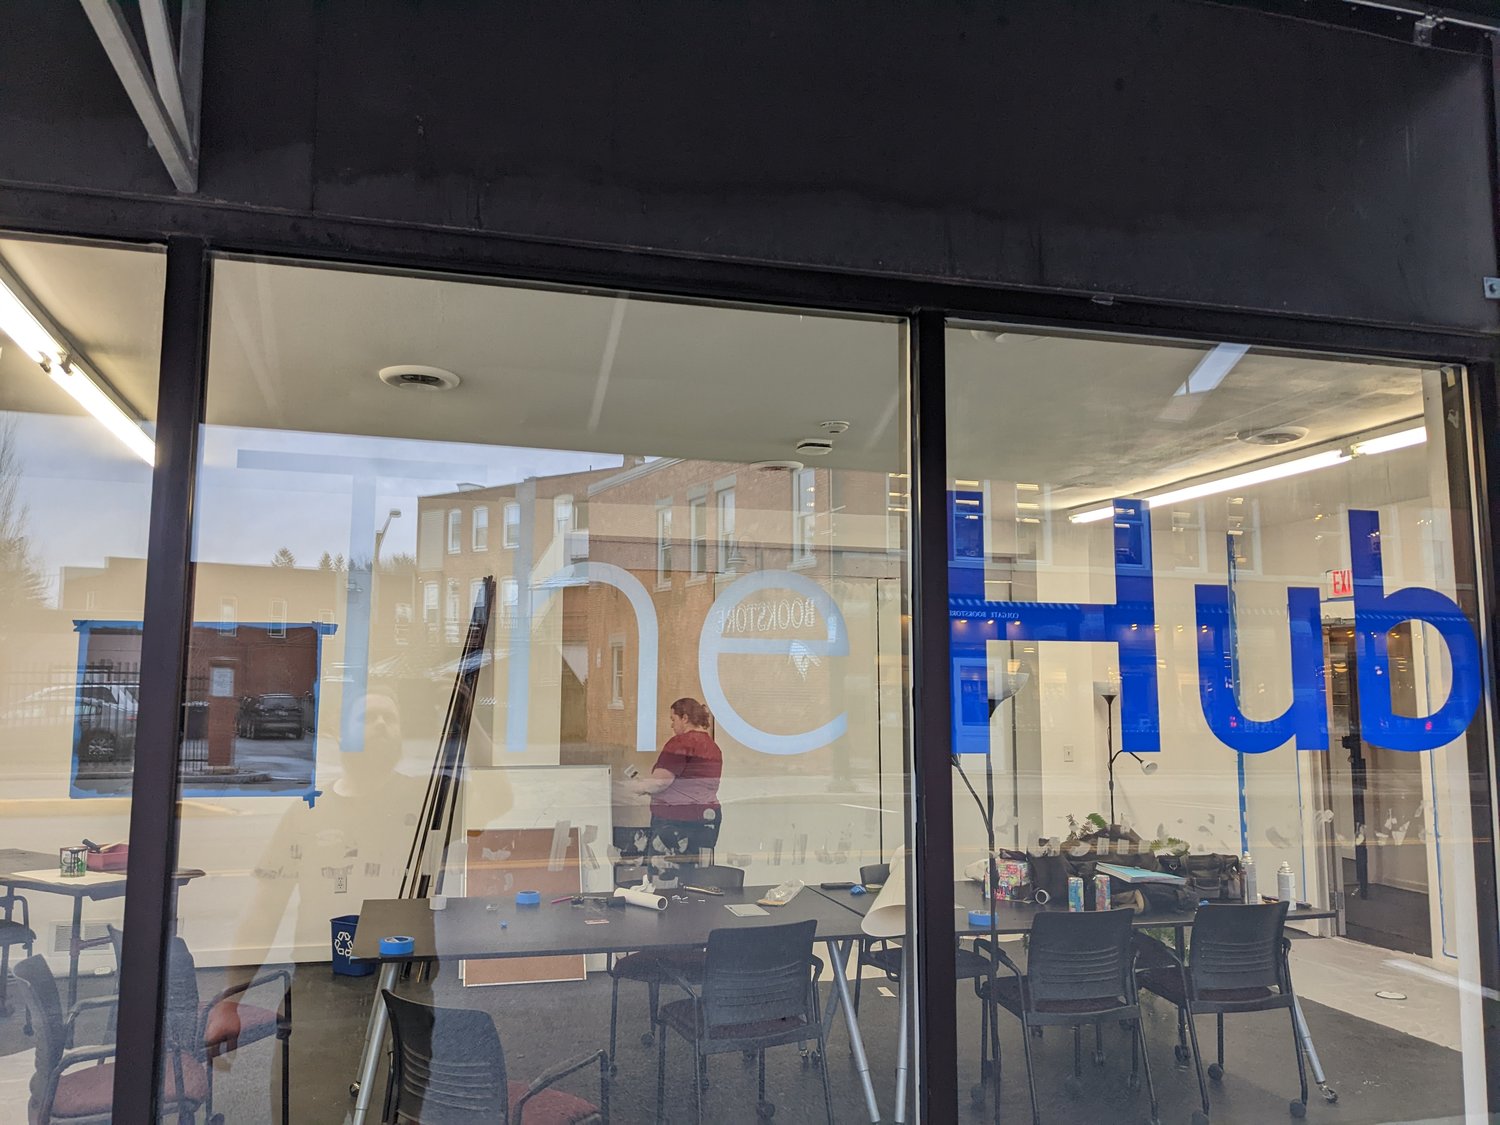 New Moon Farmstead will offer popup retail through Christmas in the front portion of The Hub, located at 20 Utica St., Hamilton. New Moon Farmstead partners with local farms to help sell their products as well as the company’s own products.